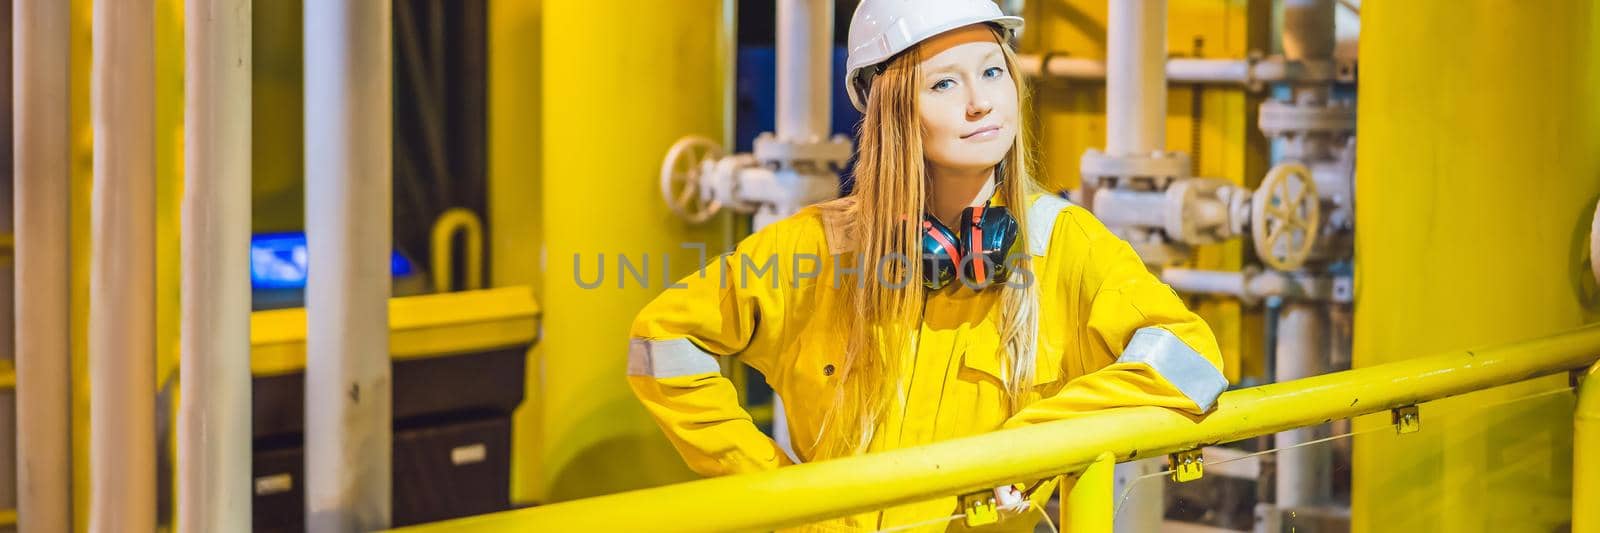 Young woman in a yellow work uniform, glasses and helmet in industrial environment,oil Platform or liquefied gas plant BANNER, LONG FORMAT by galitskaya